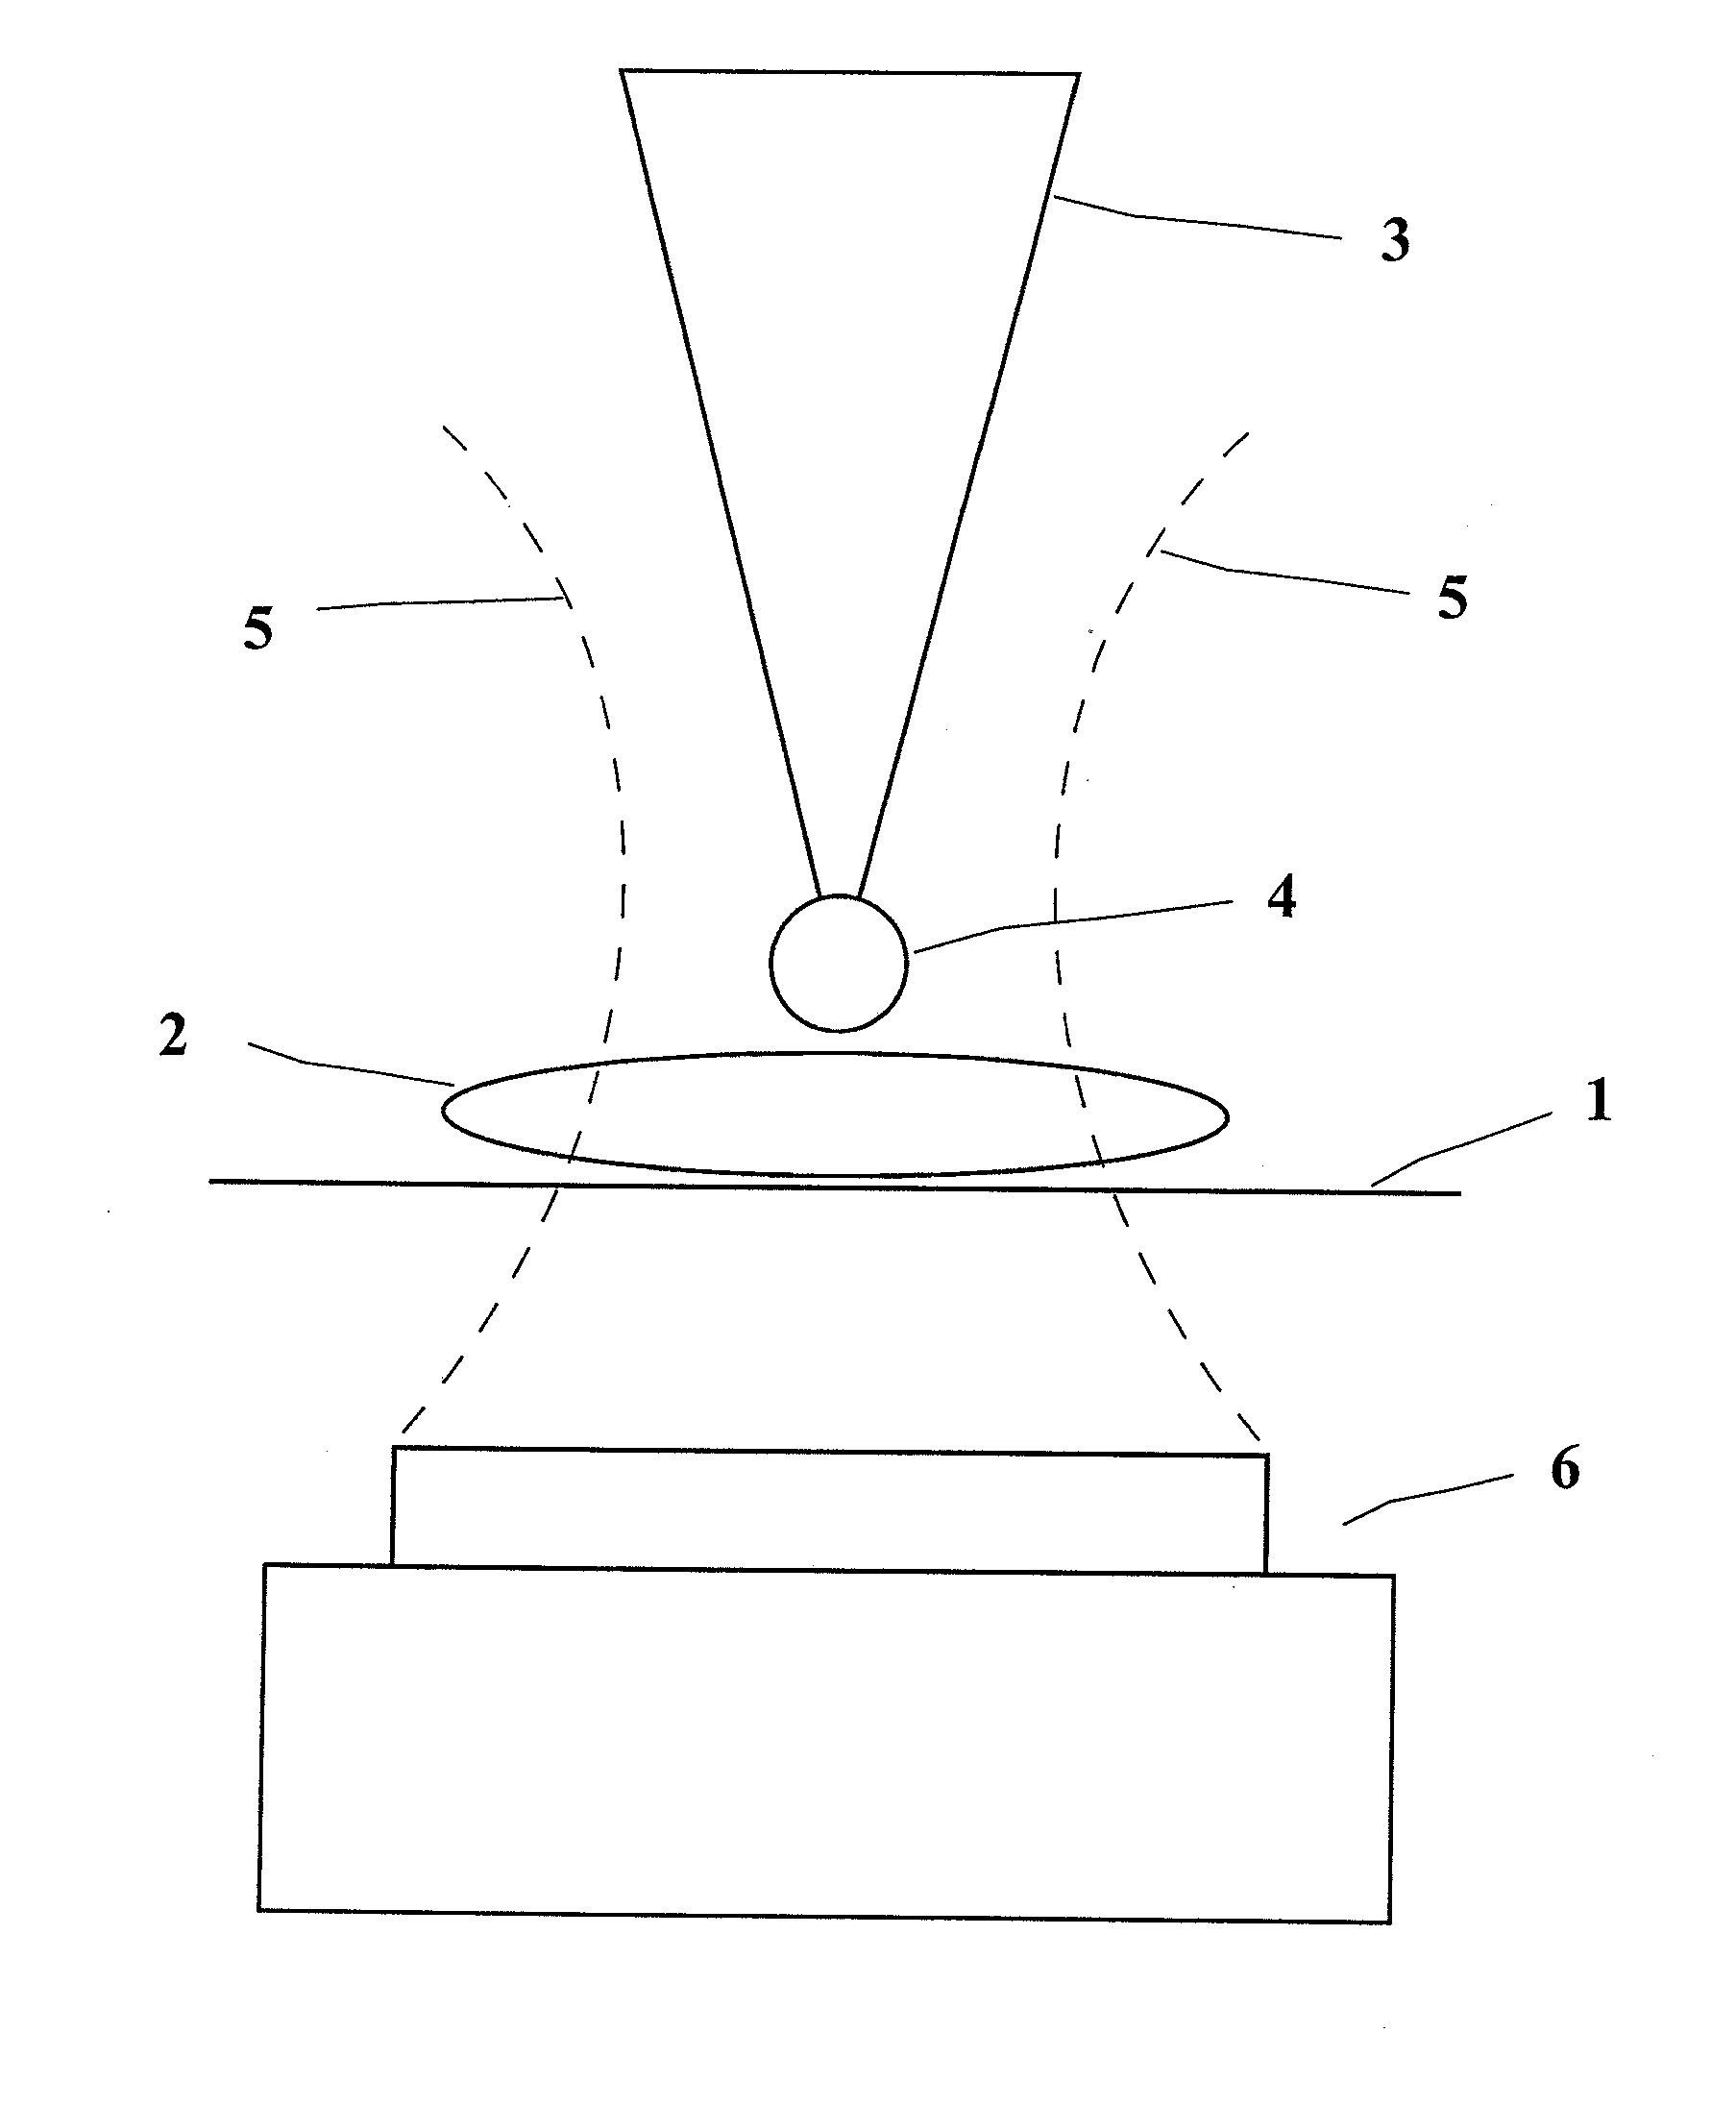 Method for identifying individual viruses in a sample